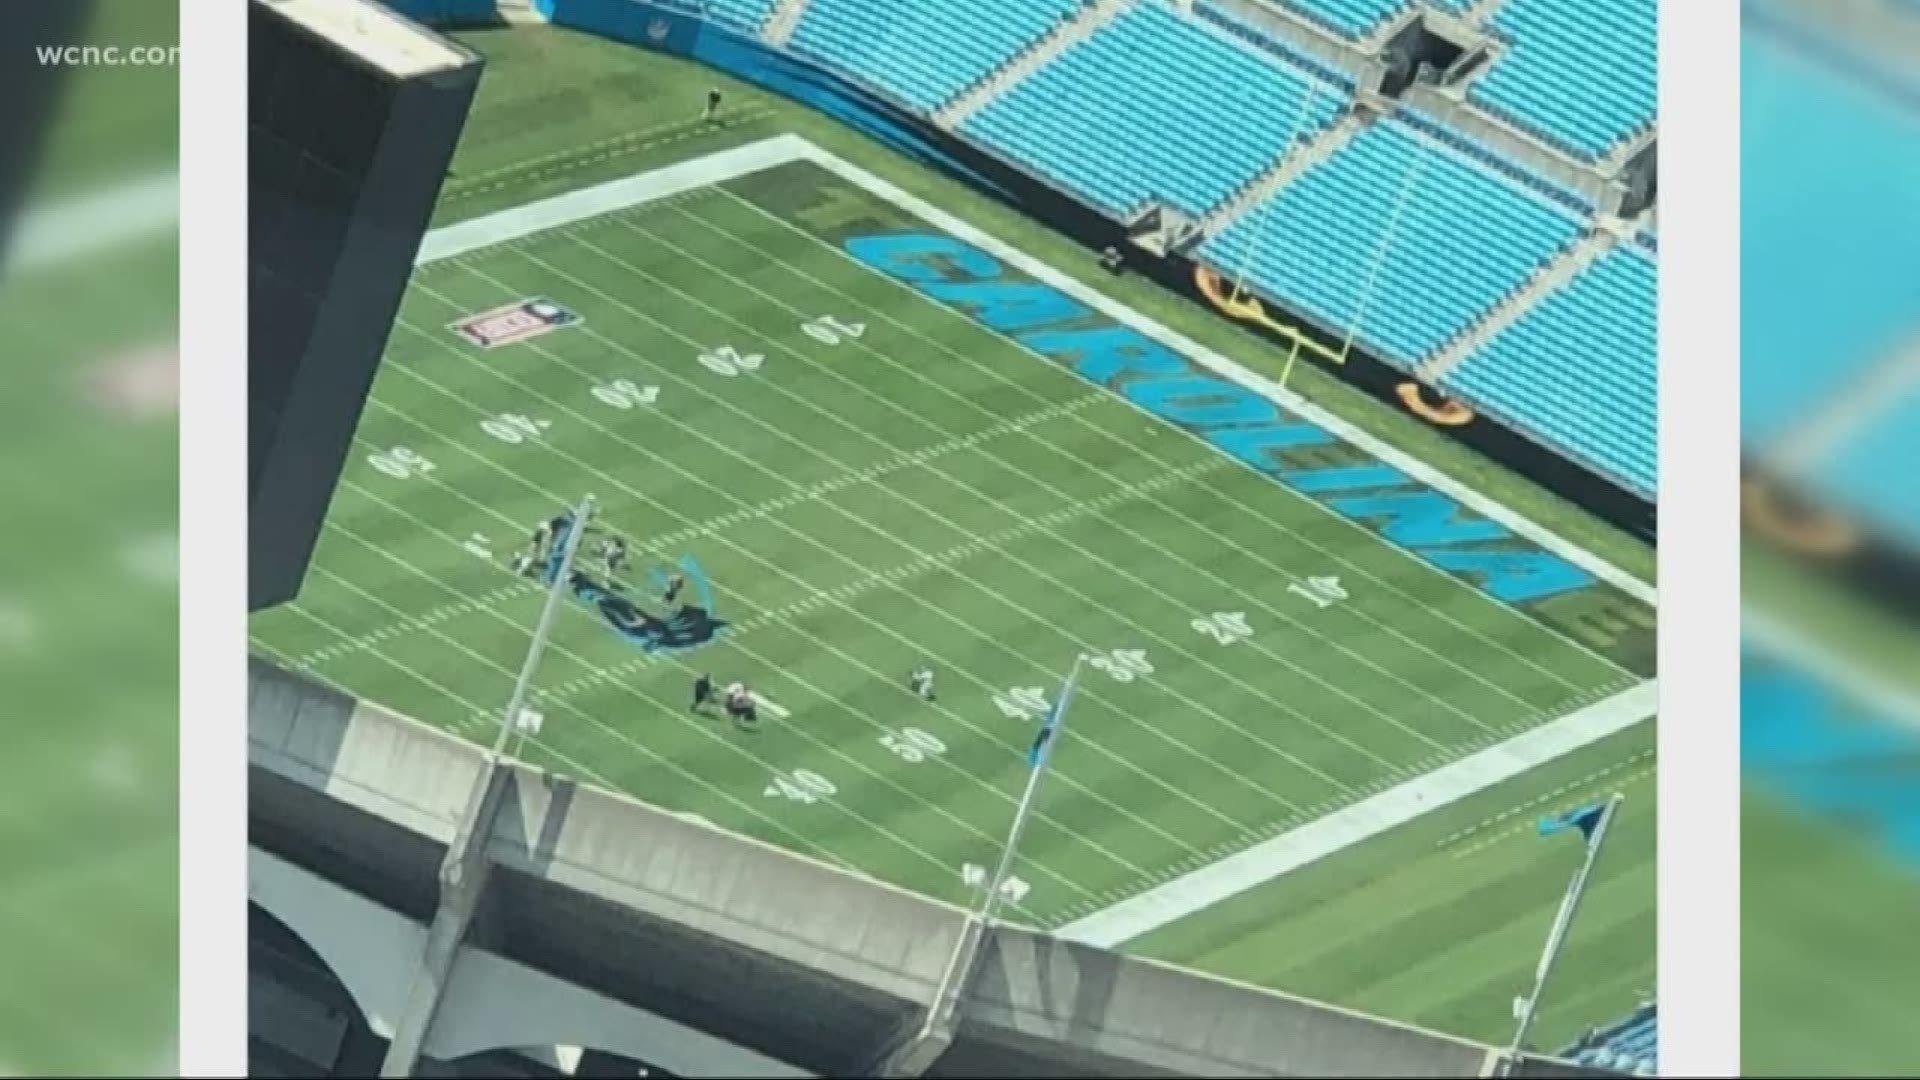 A viewer snapped a photo of crews painting the Panthers logo on the 50-yard line before Sunday's game.